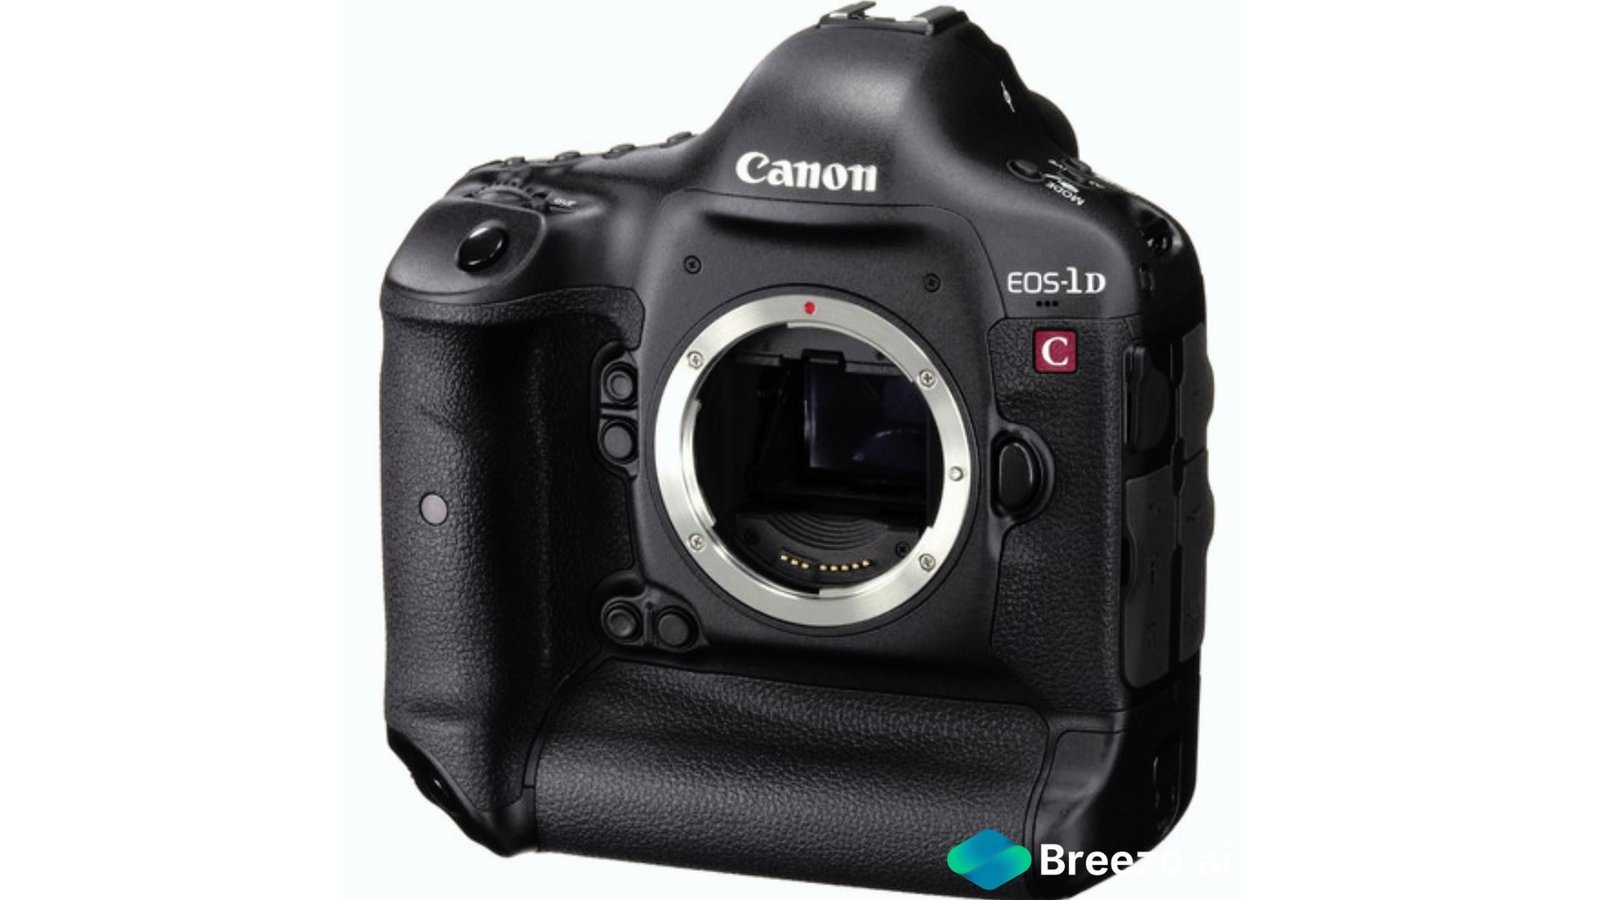 Rent Canon 1-DC Camera Body with Canon lenses Kit & Accessories in Delhi NCR, Camera accessories, Camera lenses for rent, in Delhi Gurgaon Noida, hire Shooting equipment, Lighting equipment rental, Film gear rental for Video production, camera rental company in Delhi, film equipment rental company